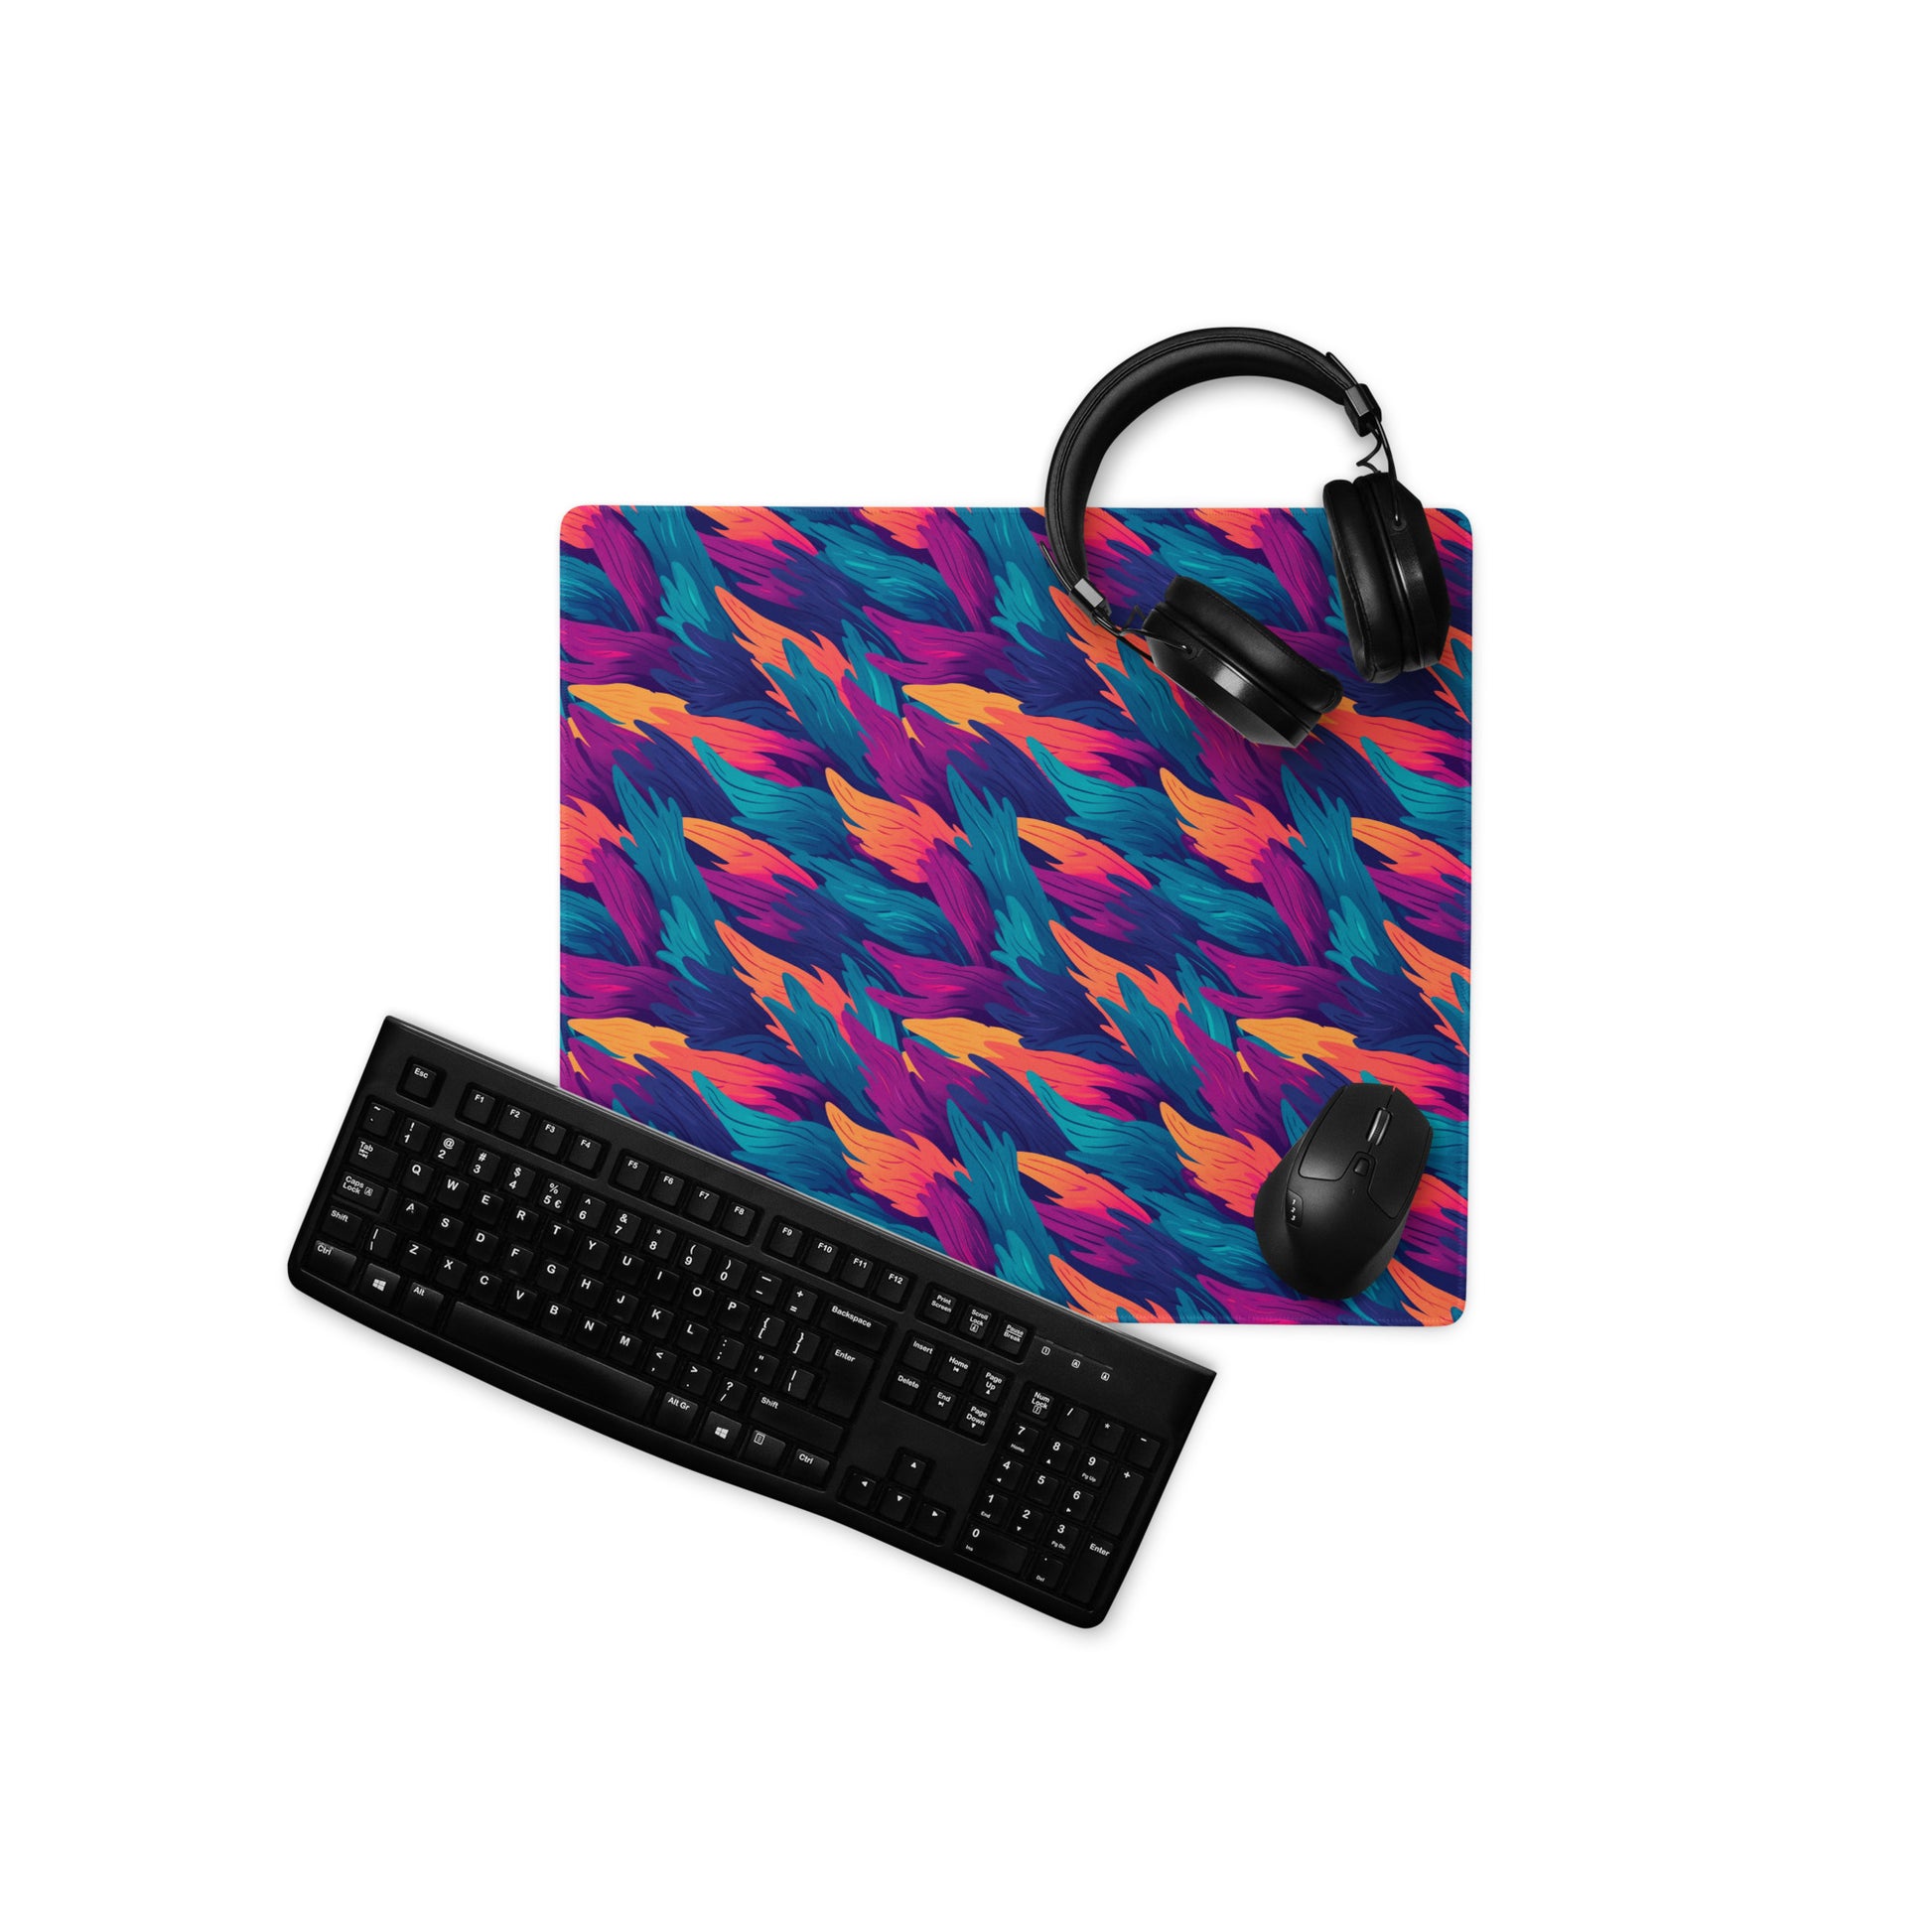 A 18" x 16" desk pad with a wavy flame pattern on it displayed with a keyboard, headphones and a mouse. Blue, Orange and Purple in color.